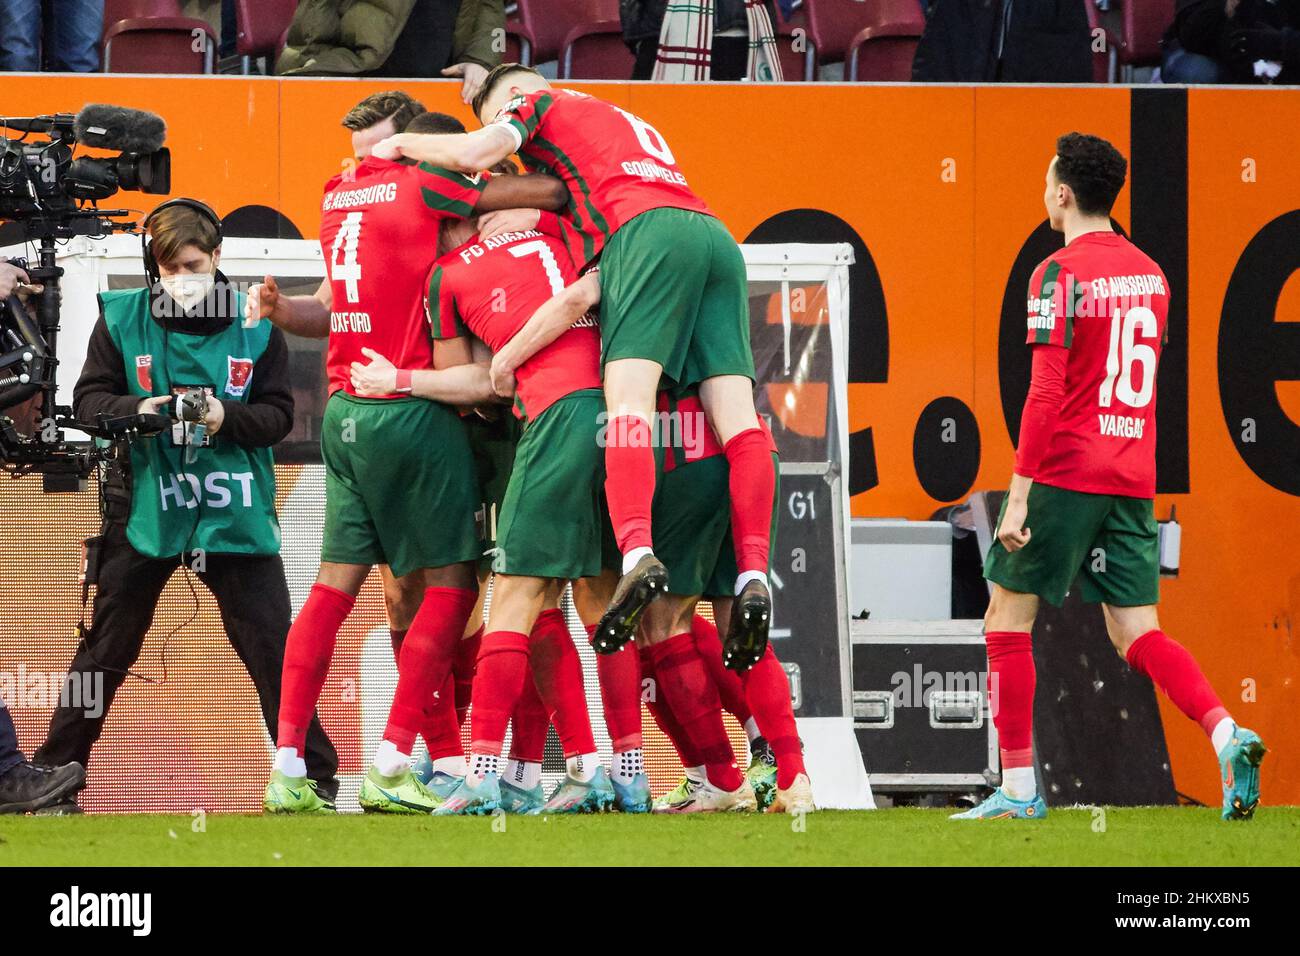 Augsburg, Germany. 5th Feb, 2022. Players of Augsburg celebrate scoring during a German Bundesliga match between FC Augsburg and 1. FC Union Berlin in Augsburg, Germany, Feb. 5, 2022. Credit: Peter Fastl/Xinhua/Alamy Live News Stock Photo